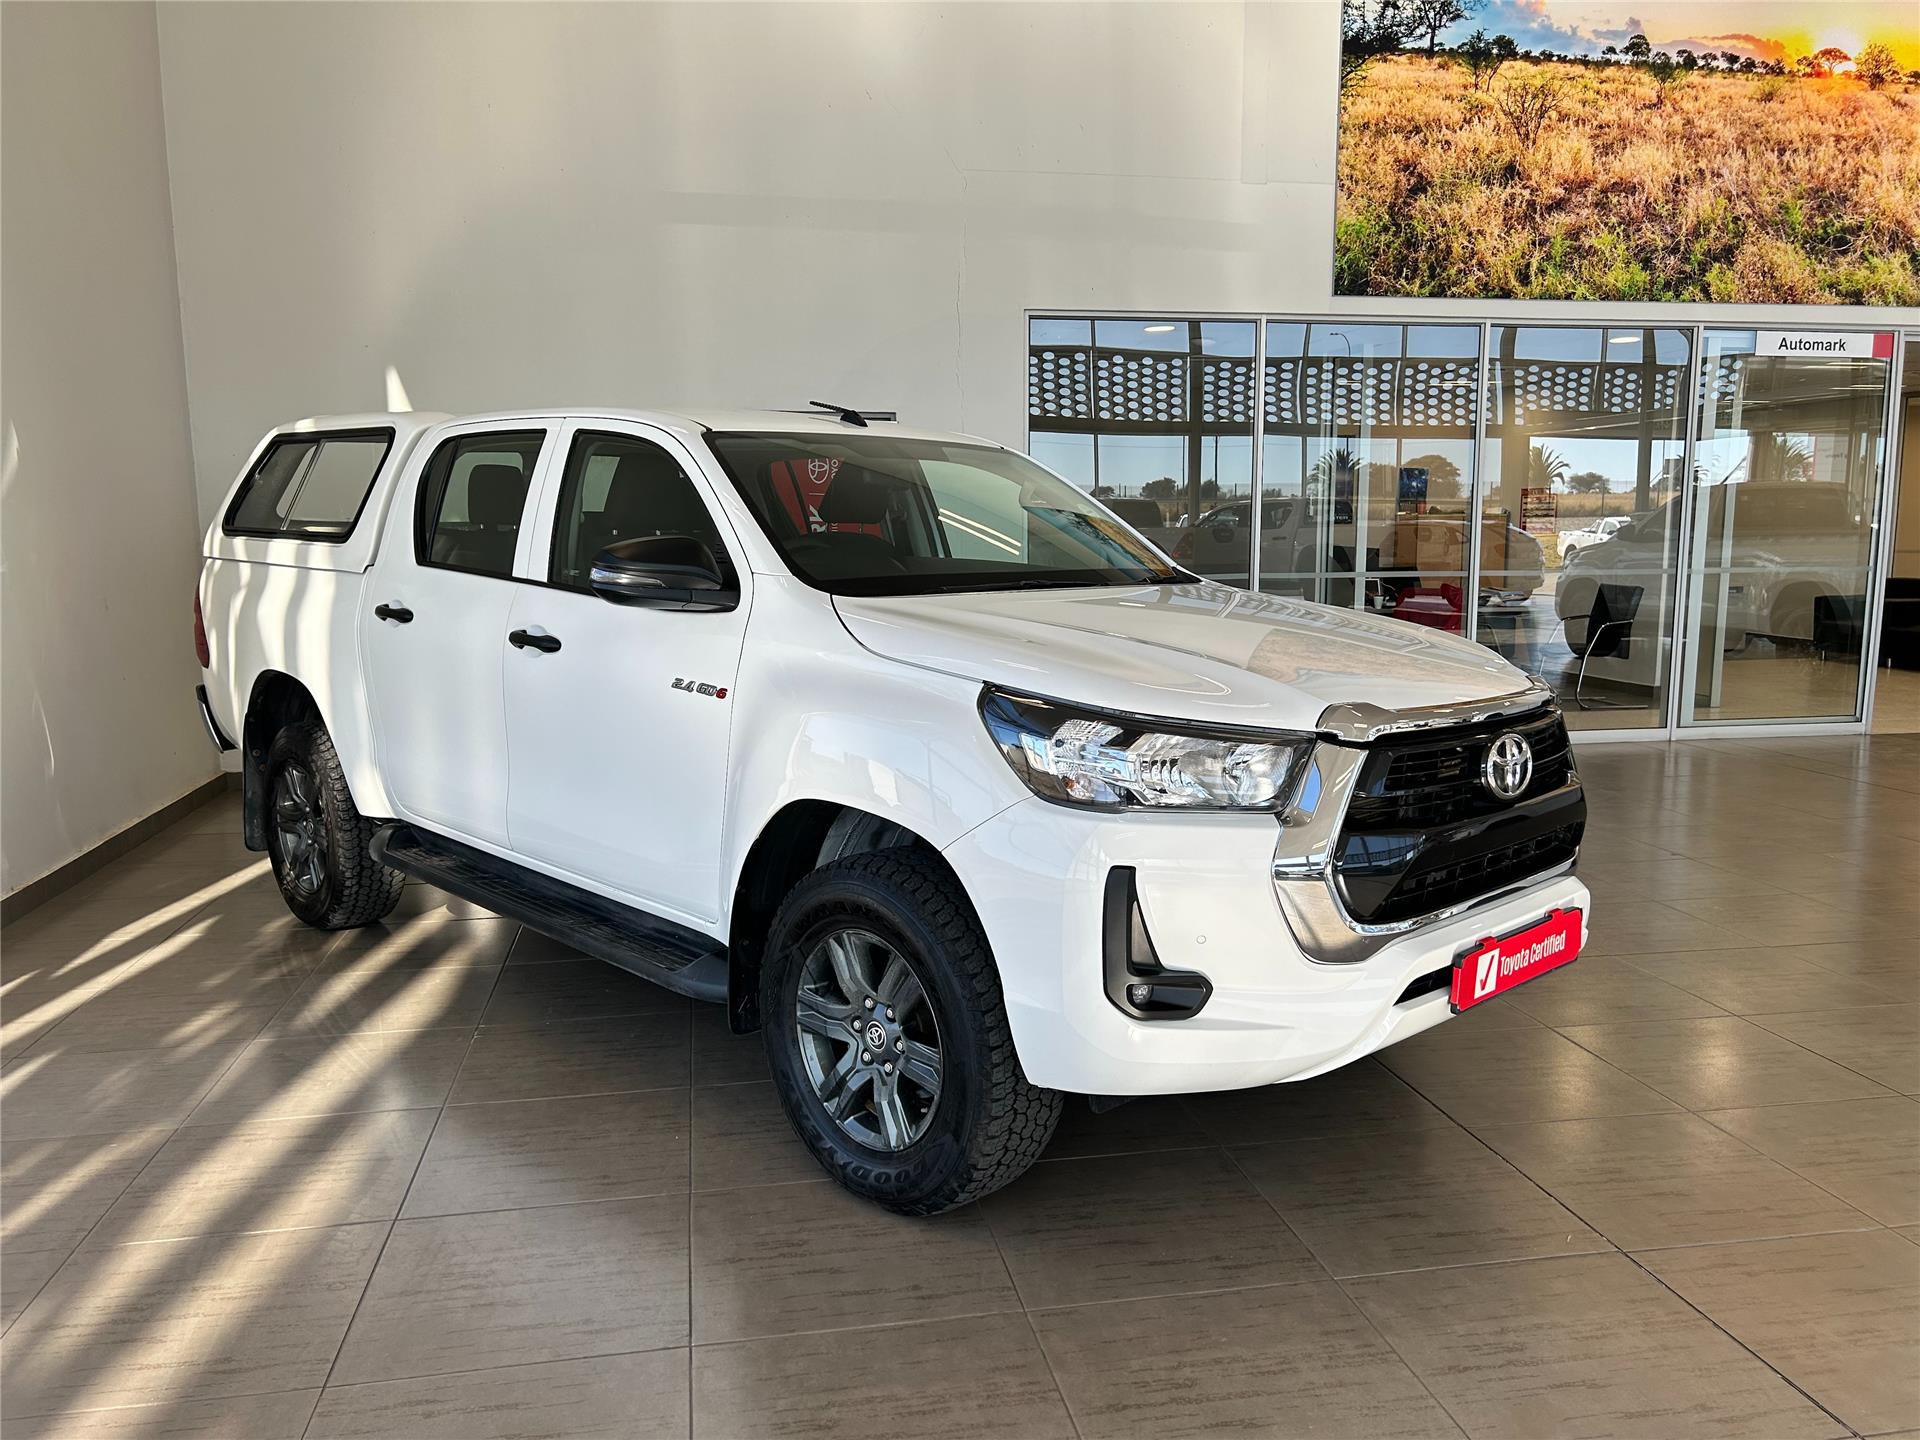 2021 Toyota Hilux Double Cab  for sale - 698291/1